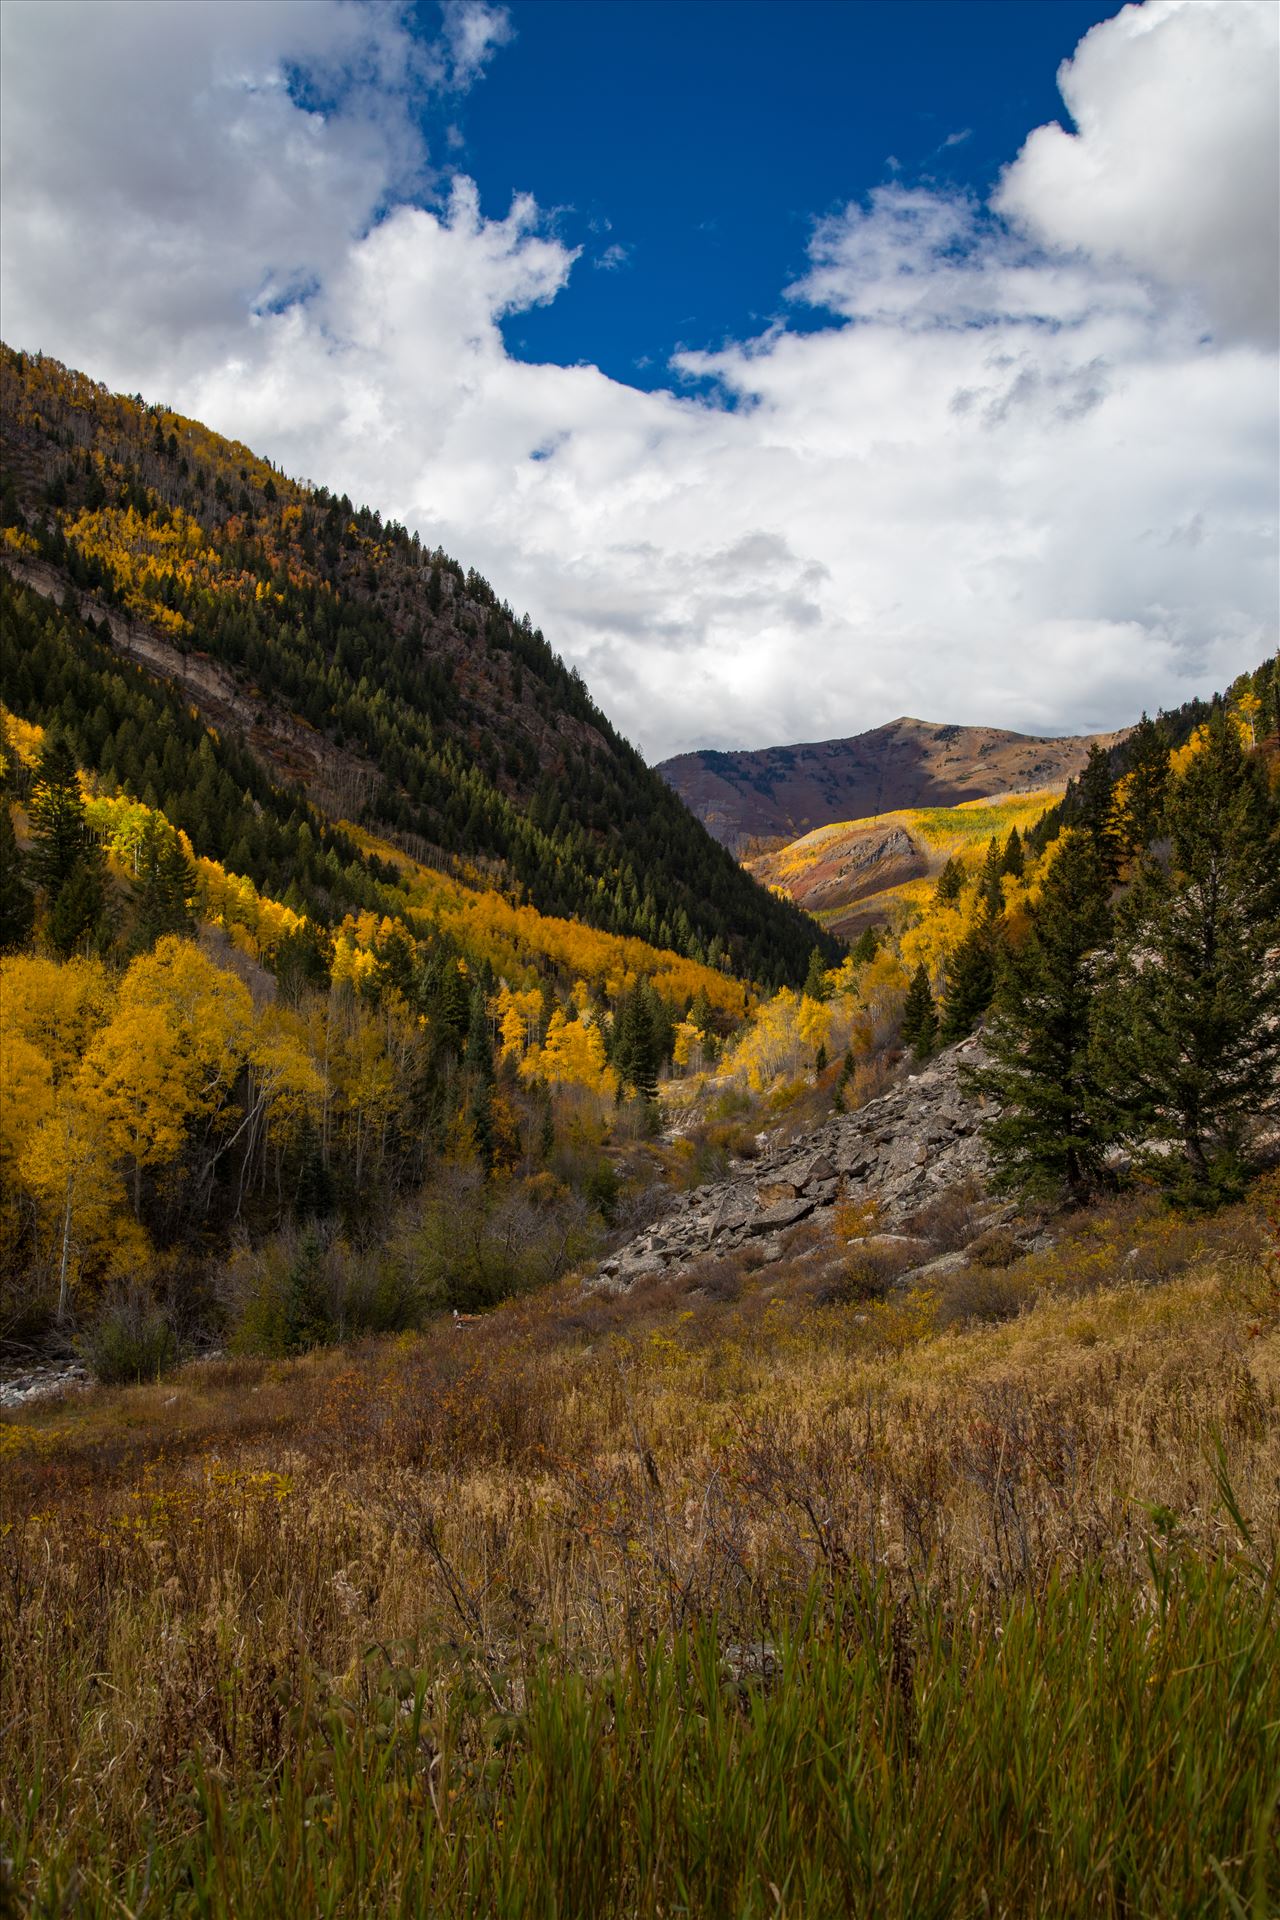 Snowmass Wilderness Area No 3 - Fall grasses and valley in the Snowmass Wilderness Area. by Scott Smith Photos